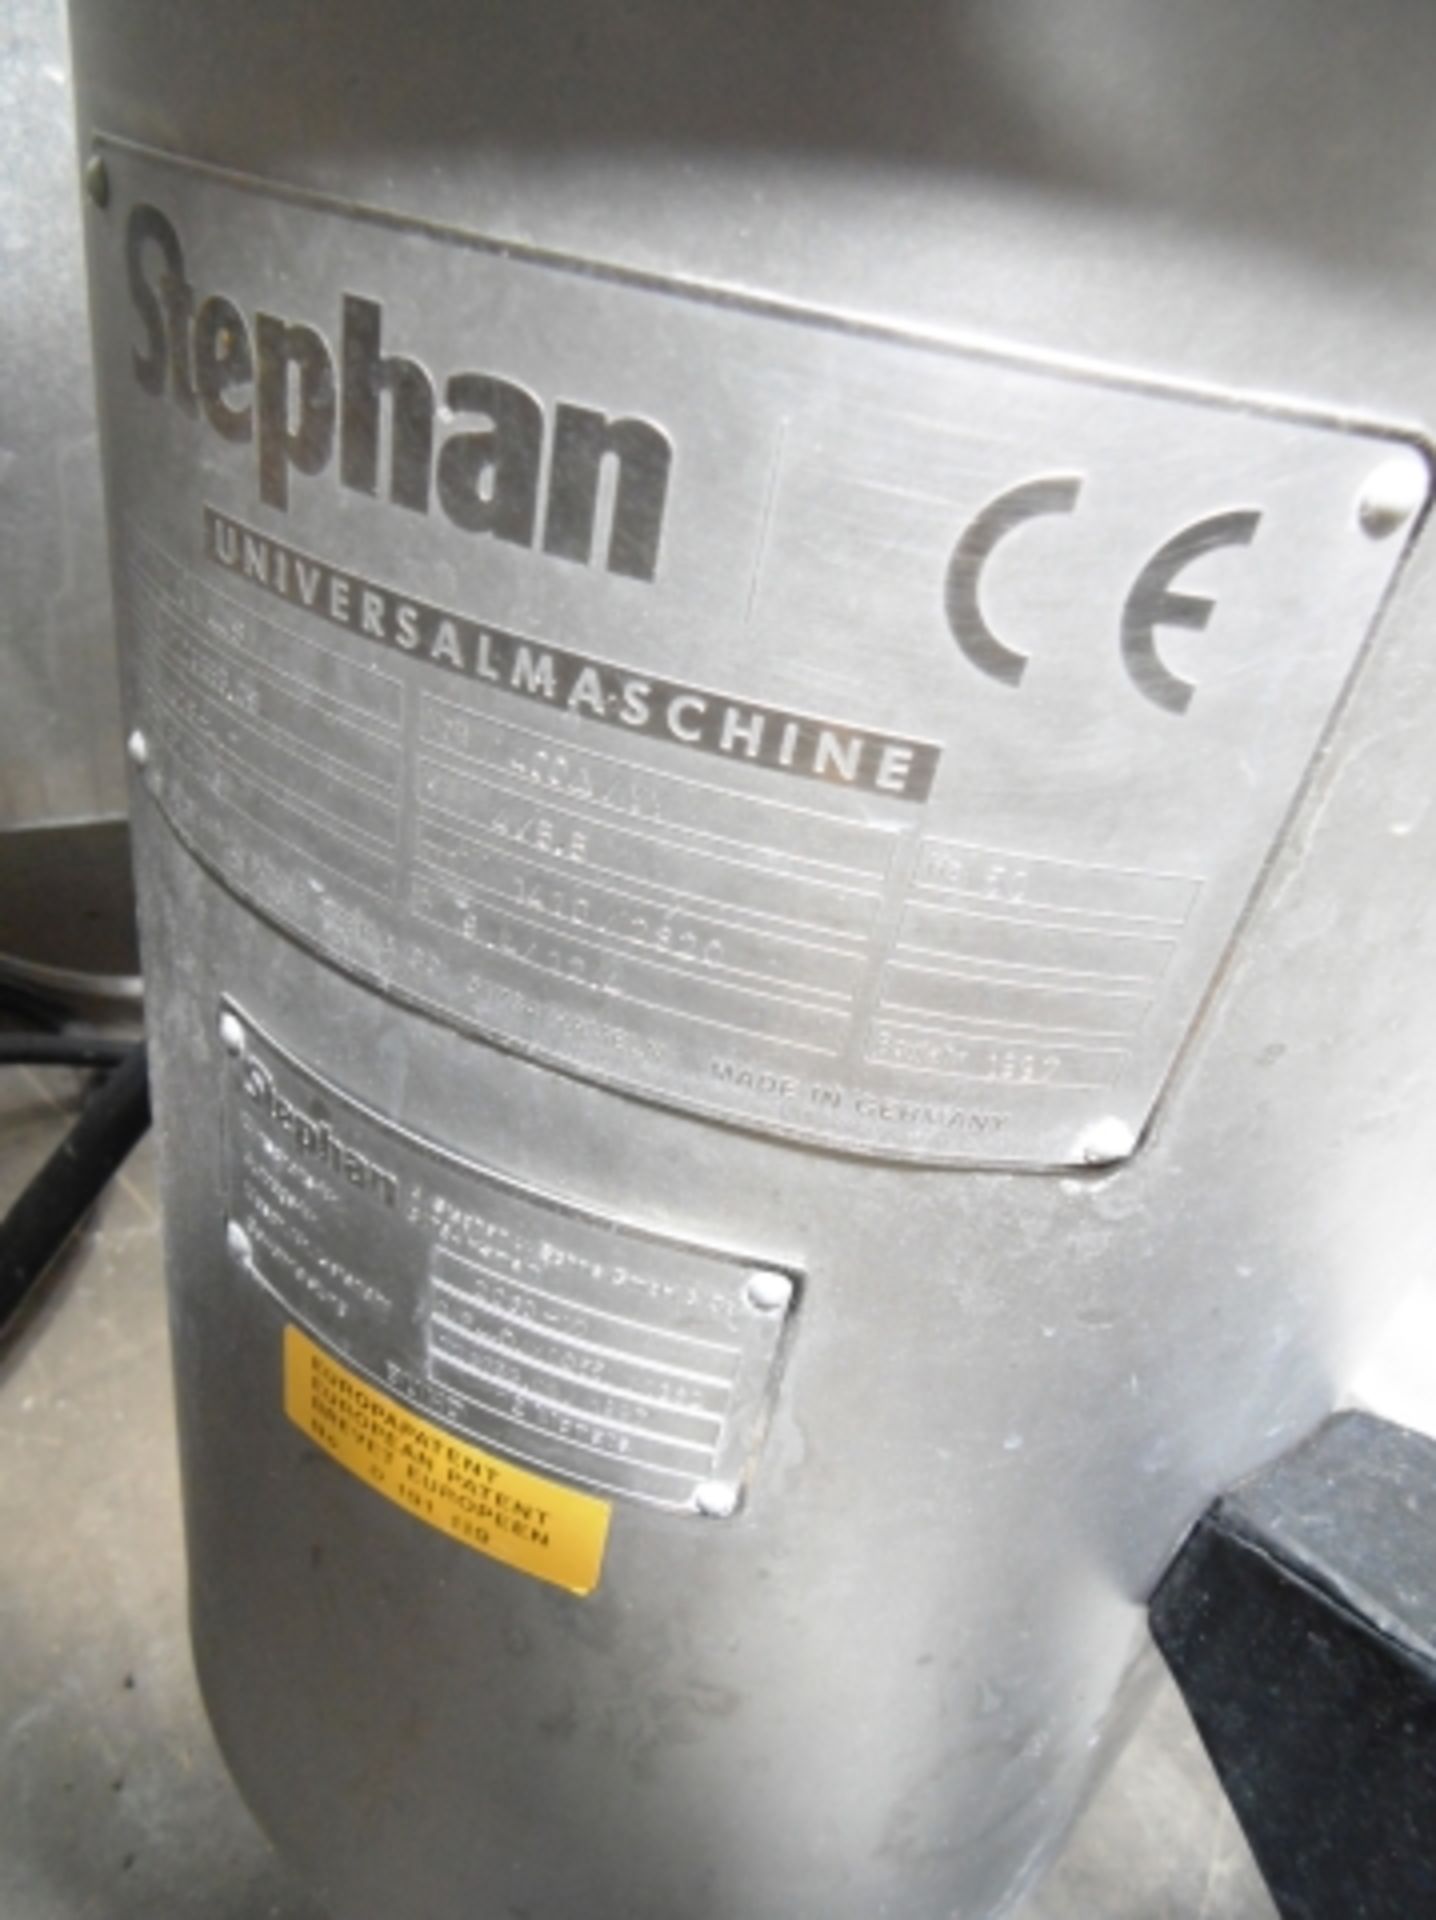 * 1997 Stephan type UM44S Universal Stainless Steel Vertical Cutter Mixer; 3 phase - 400V; serial no - Image 4 of 5